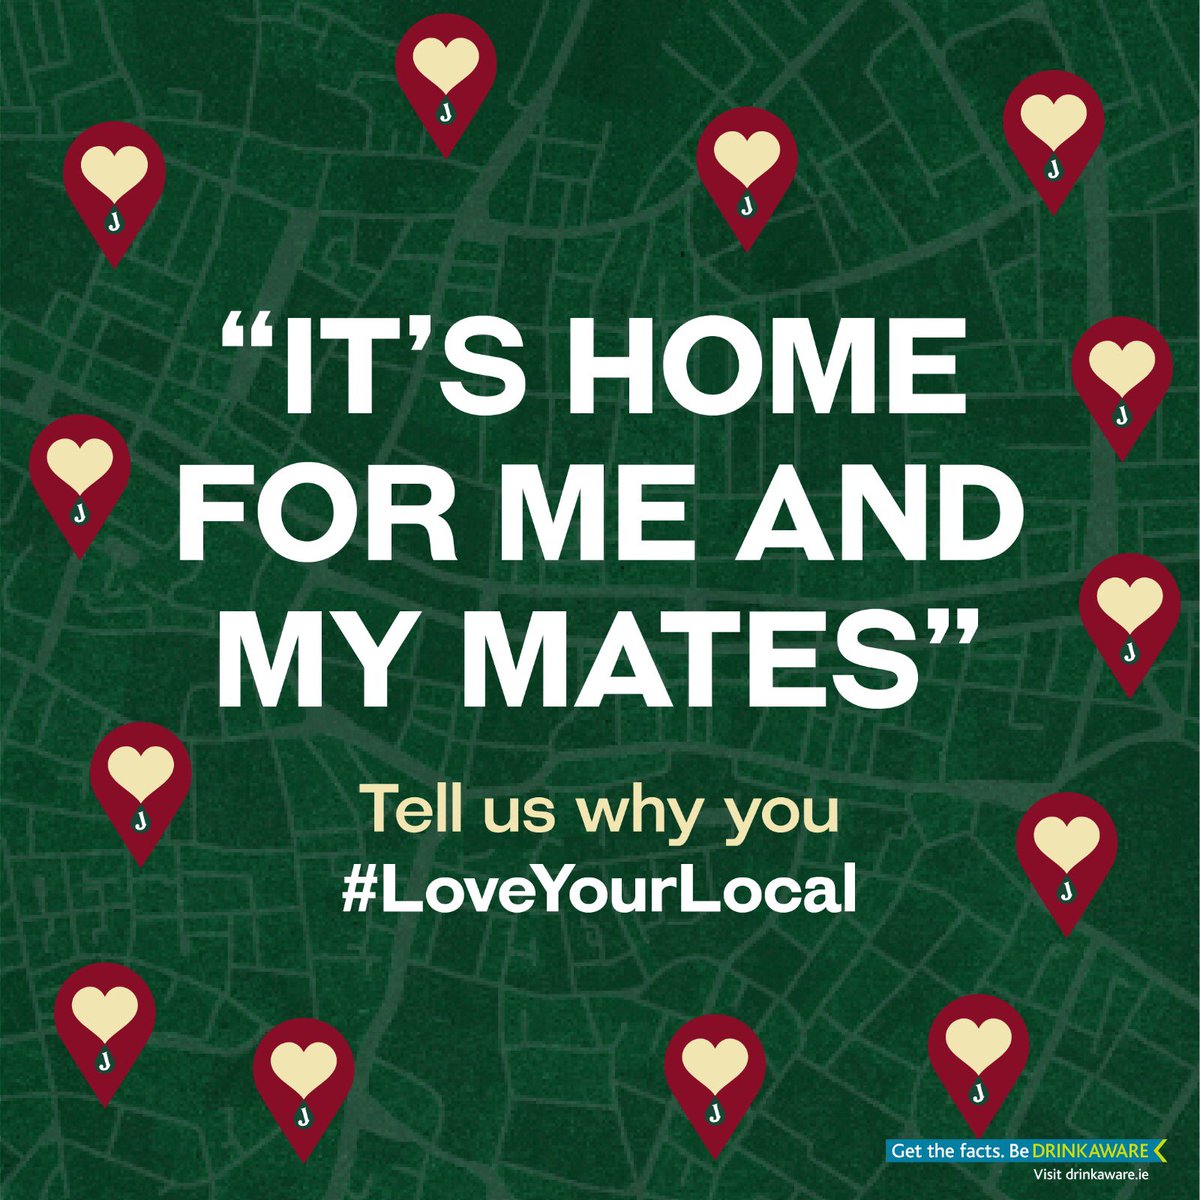 Love Your Local? So do we. It’s only a matter of time before we're back. We’re working on something pretty special, let’s call it a love letter, for now... we need your help, tag your local below ⬇️ and let us know what you're looking forward to most! drinkaware.ie